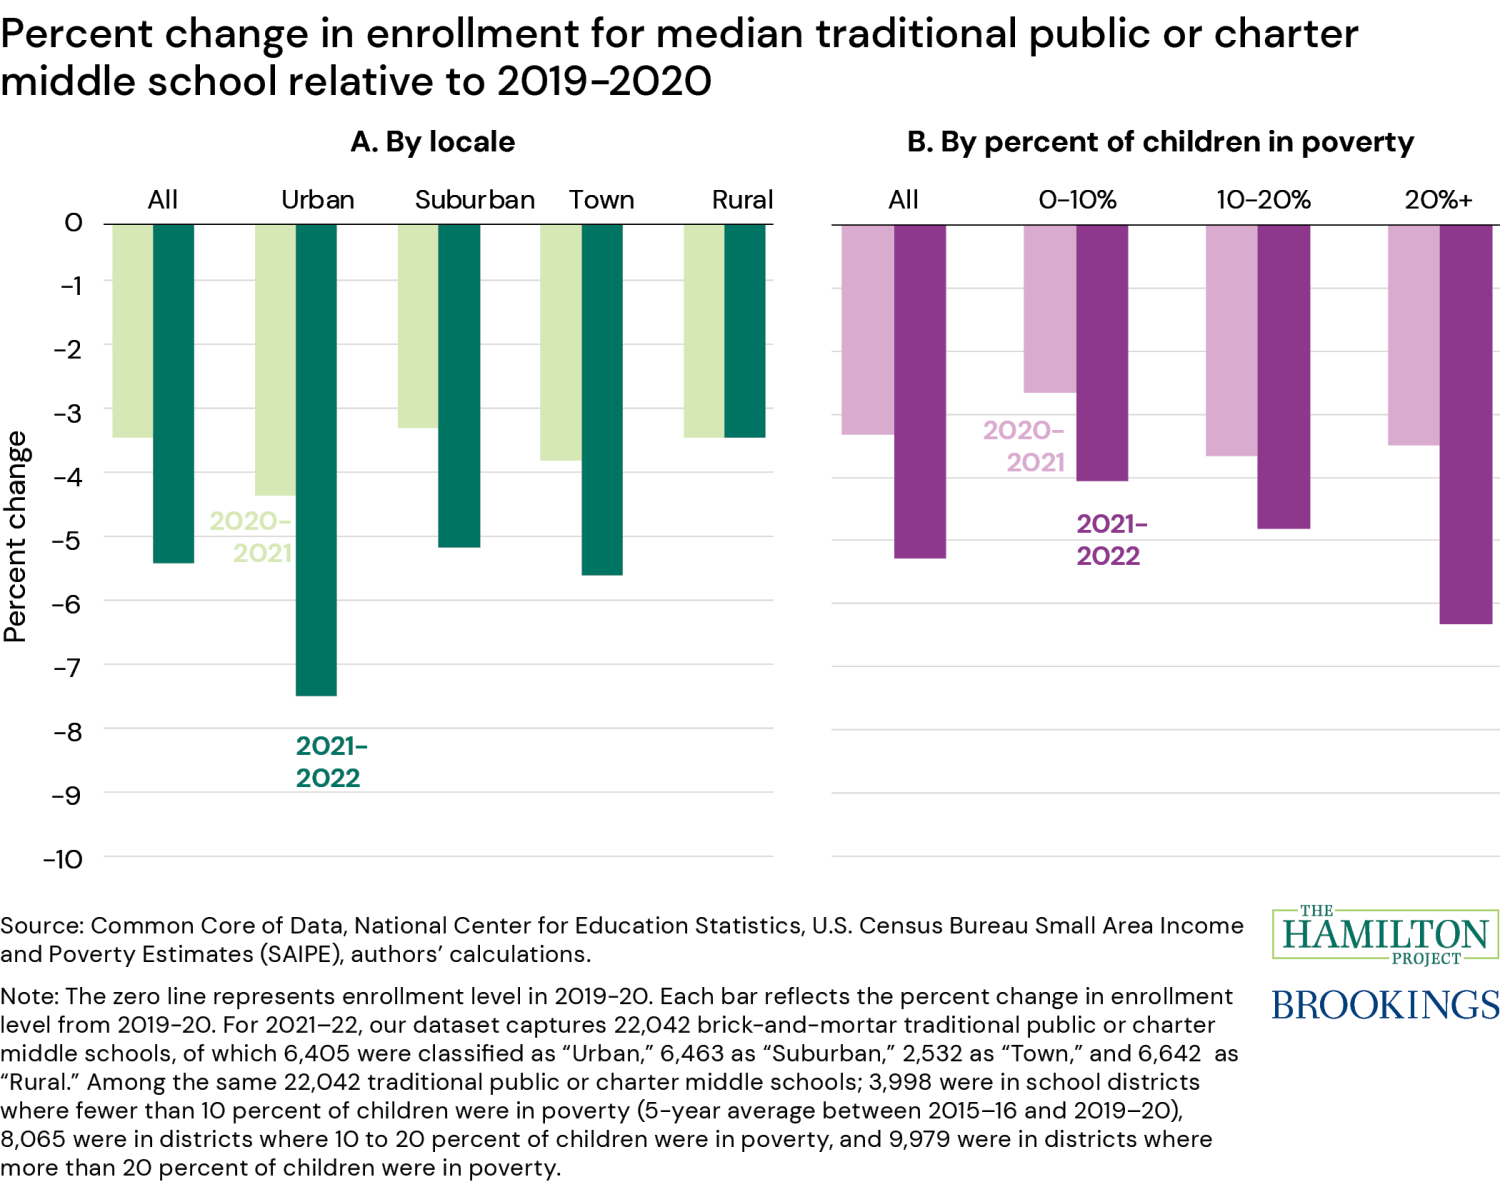 Figure: Percent change in enrollment for median traditional public or charter middle schools relative to 2019-2020